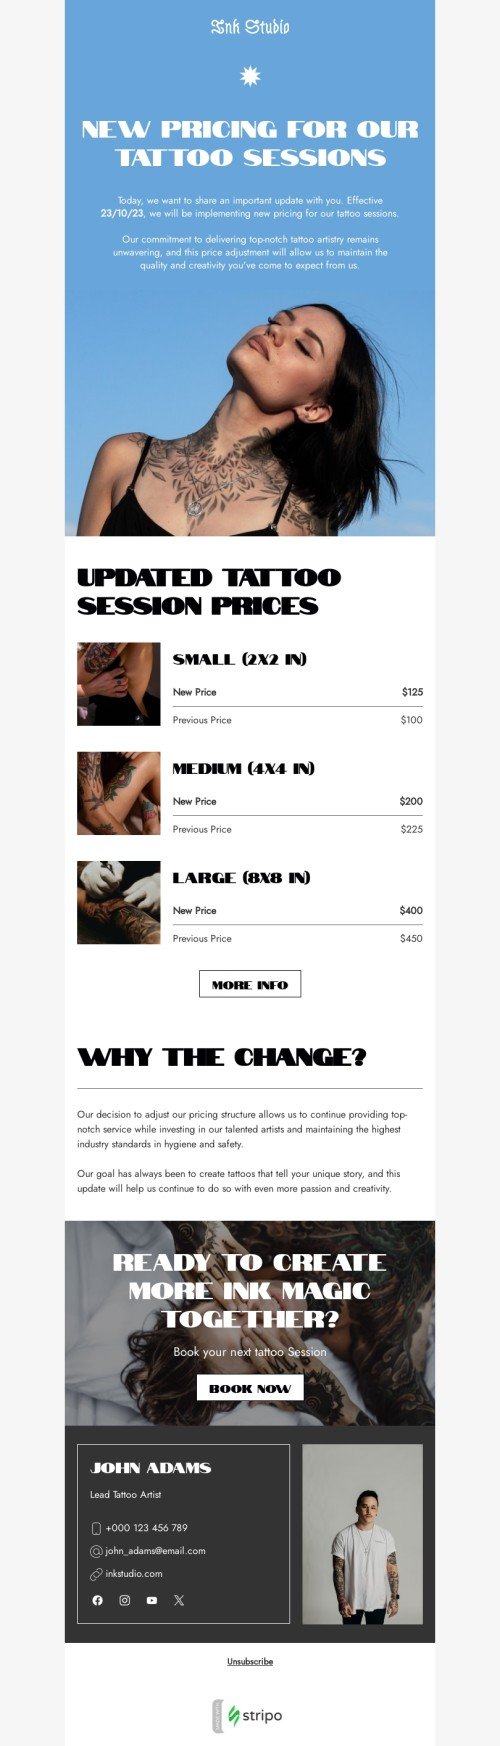 Price list email template "New pricing for our tattoo sessions" for tattoo industry mobile view